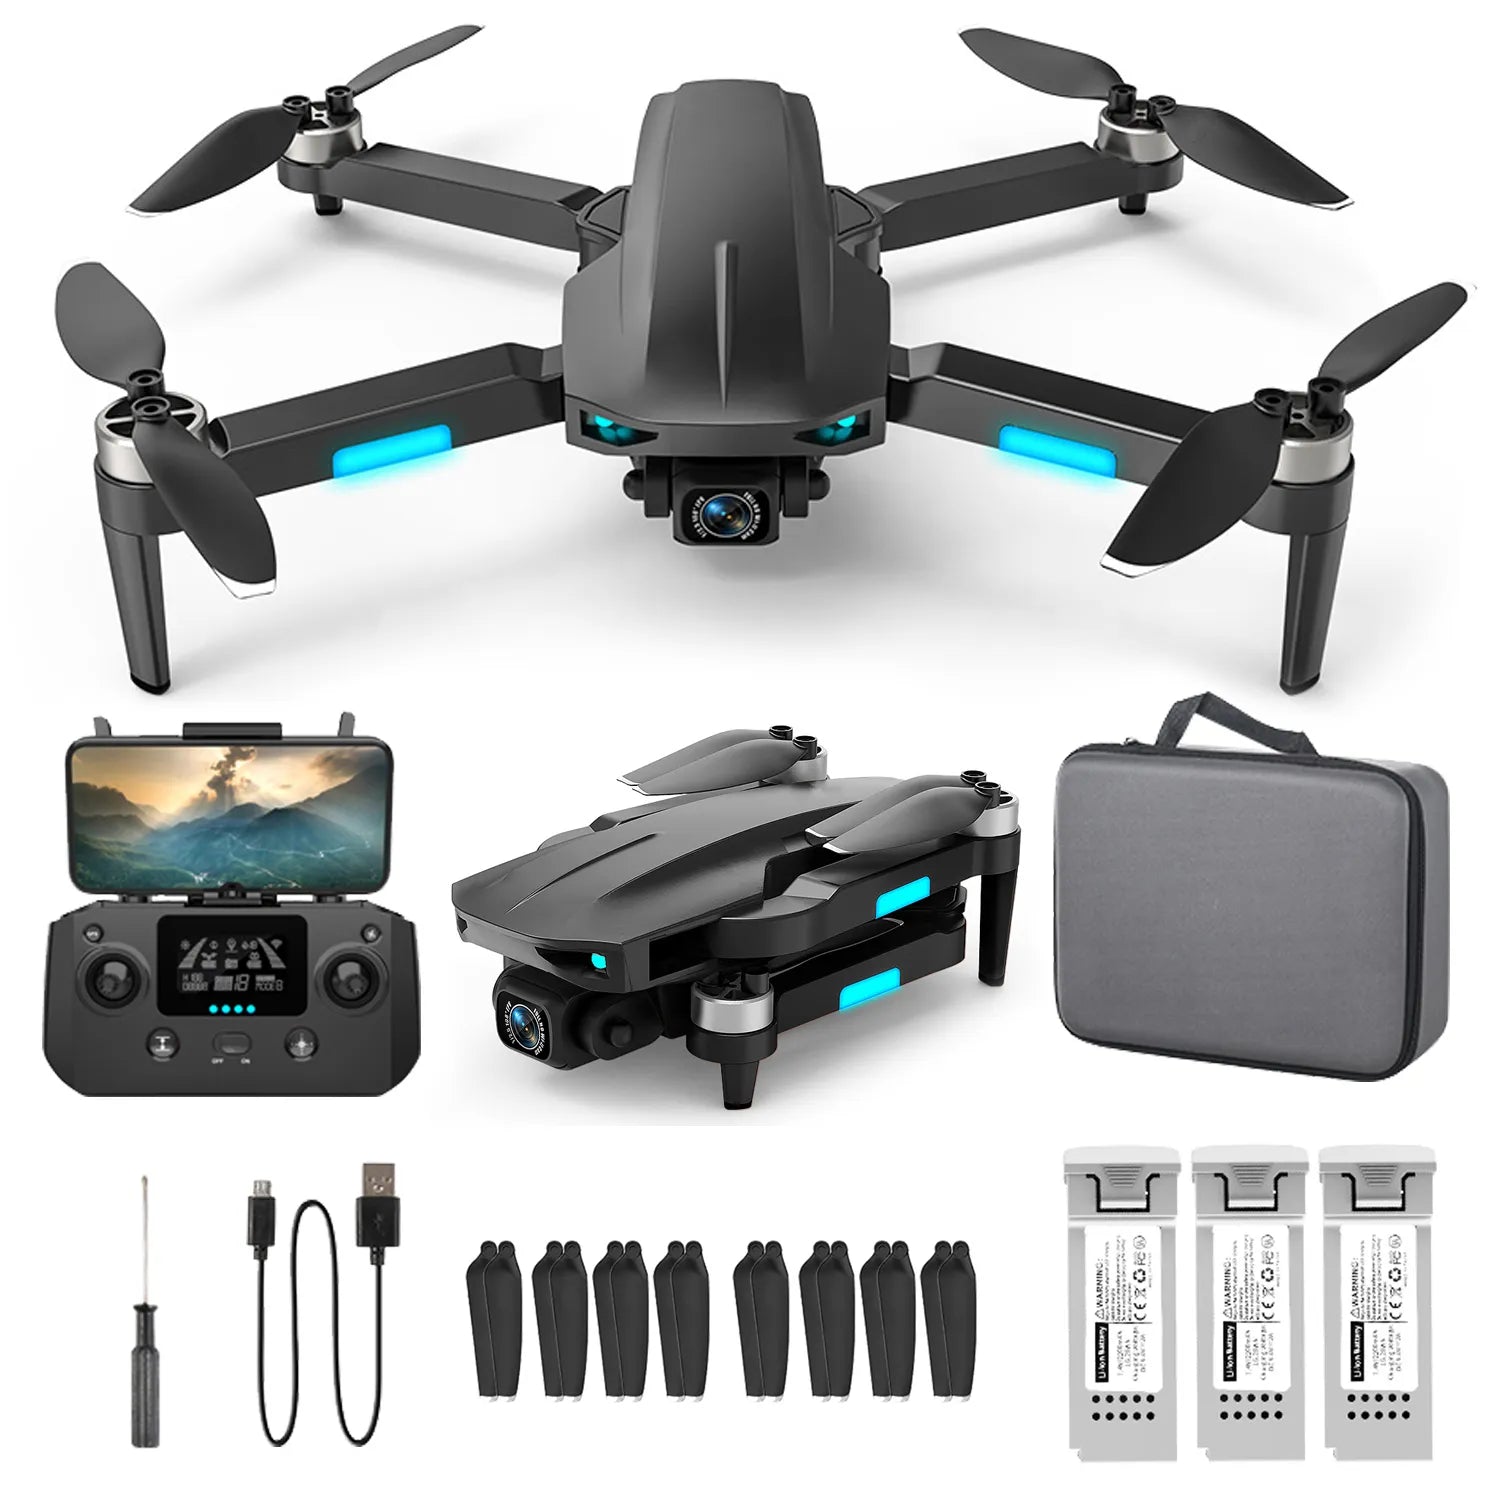 Drone  UAV (Unmanned Aerial Vehicle)  Quadcopter  Aerial photography  Remote control drone  Drone technology  Drone pilot  Drone flying  Drone videography  Drone racing  Drone regulations  Drone hobbyist  FPV (First-Person View) drone  Drone camera  Drone accessories  DJI (a popular drone brand)  Drone footage  Drone industry  Drone innovation